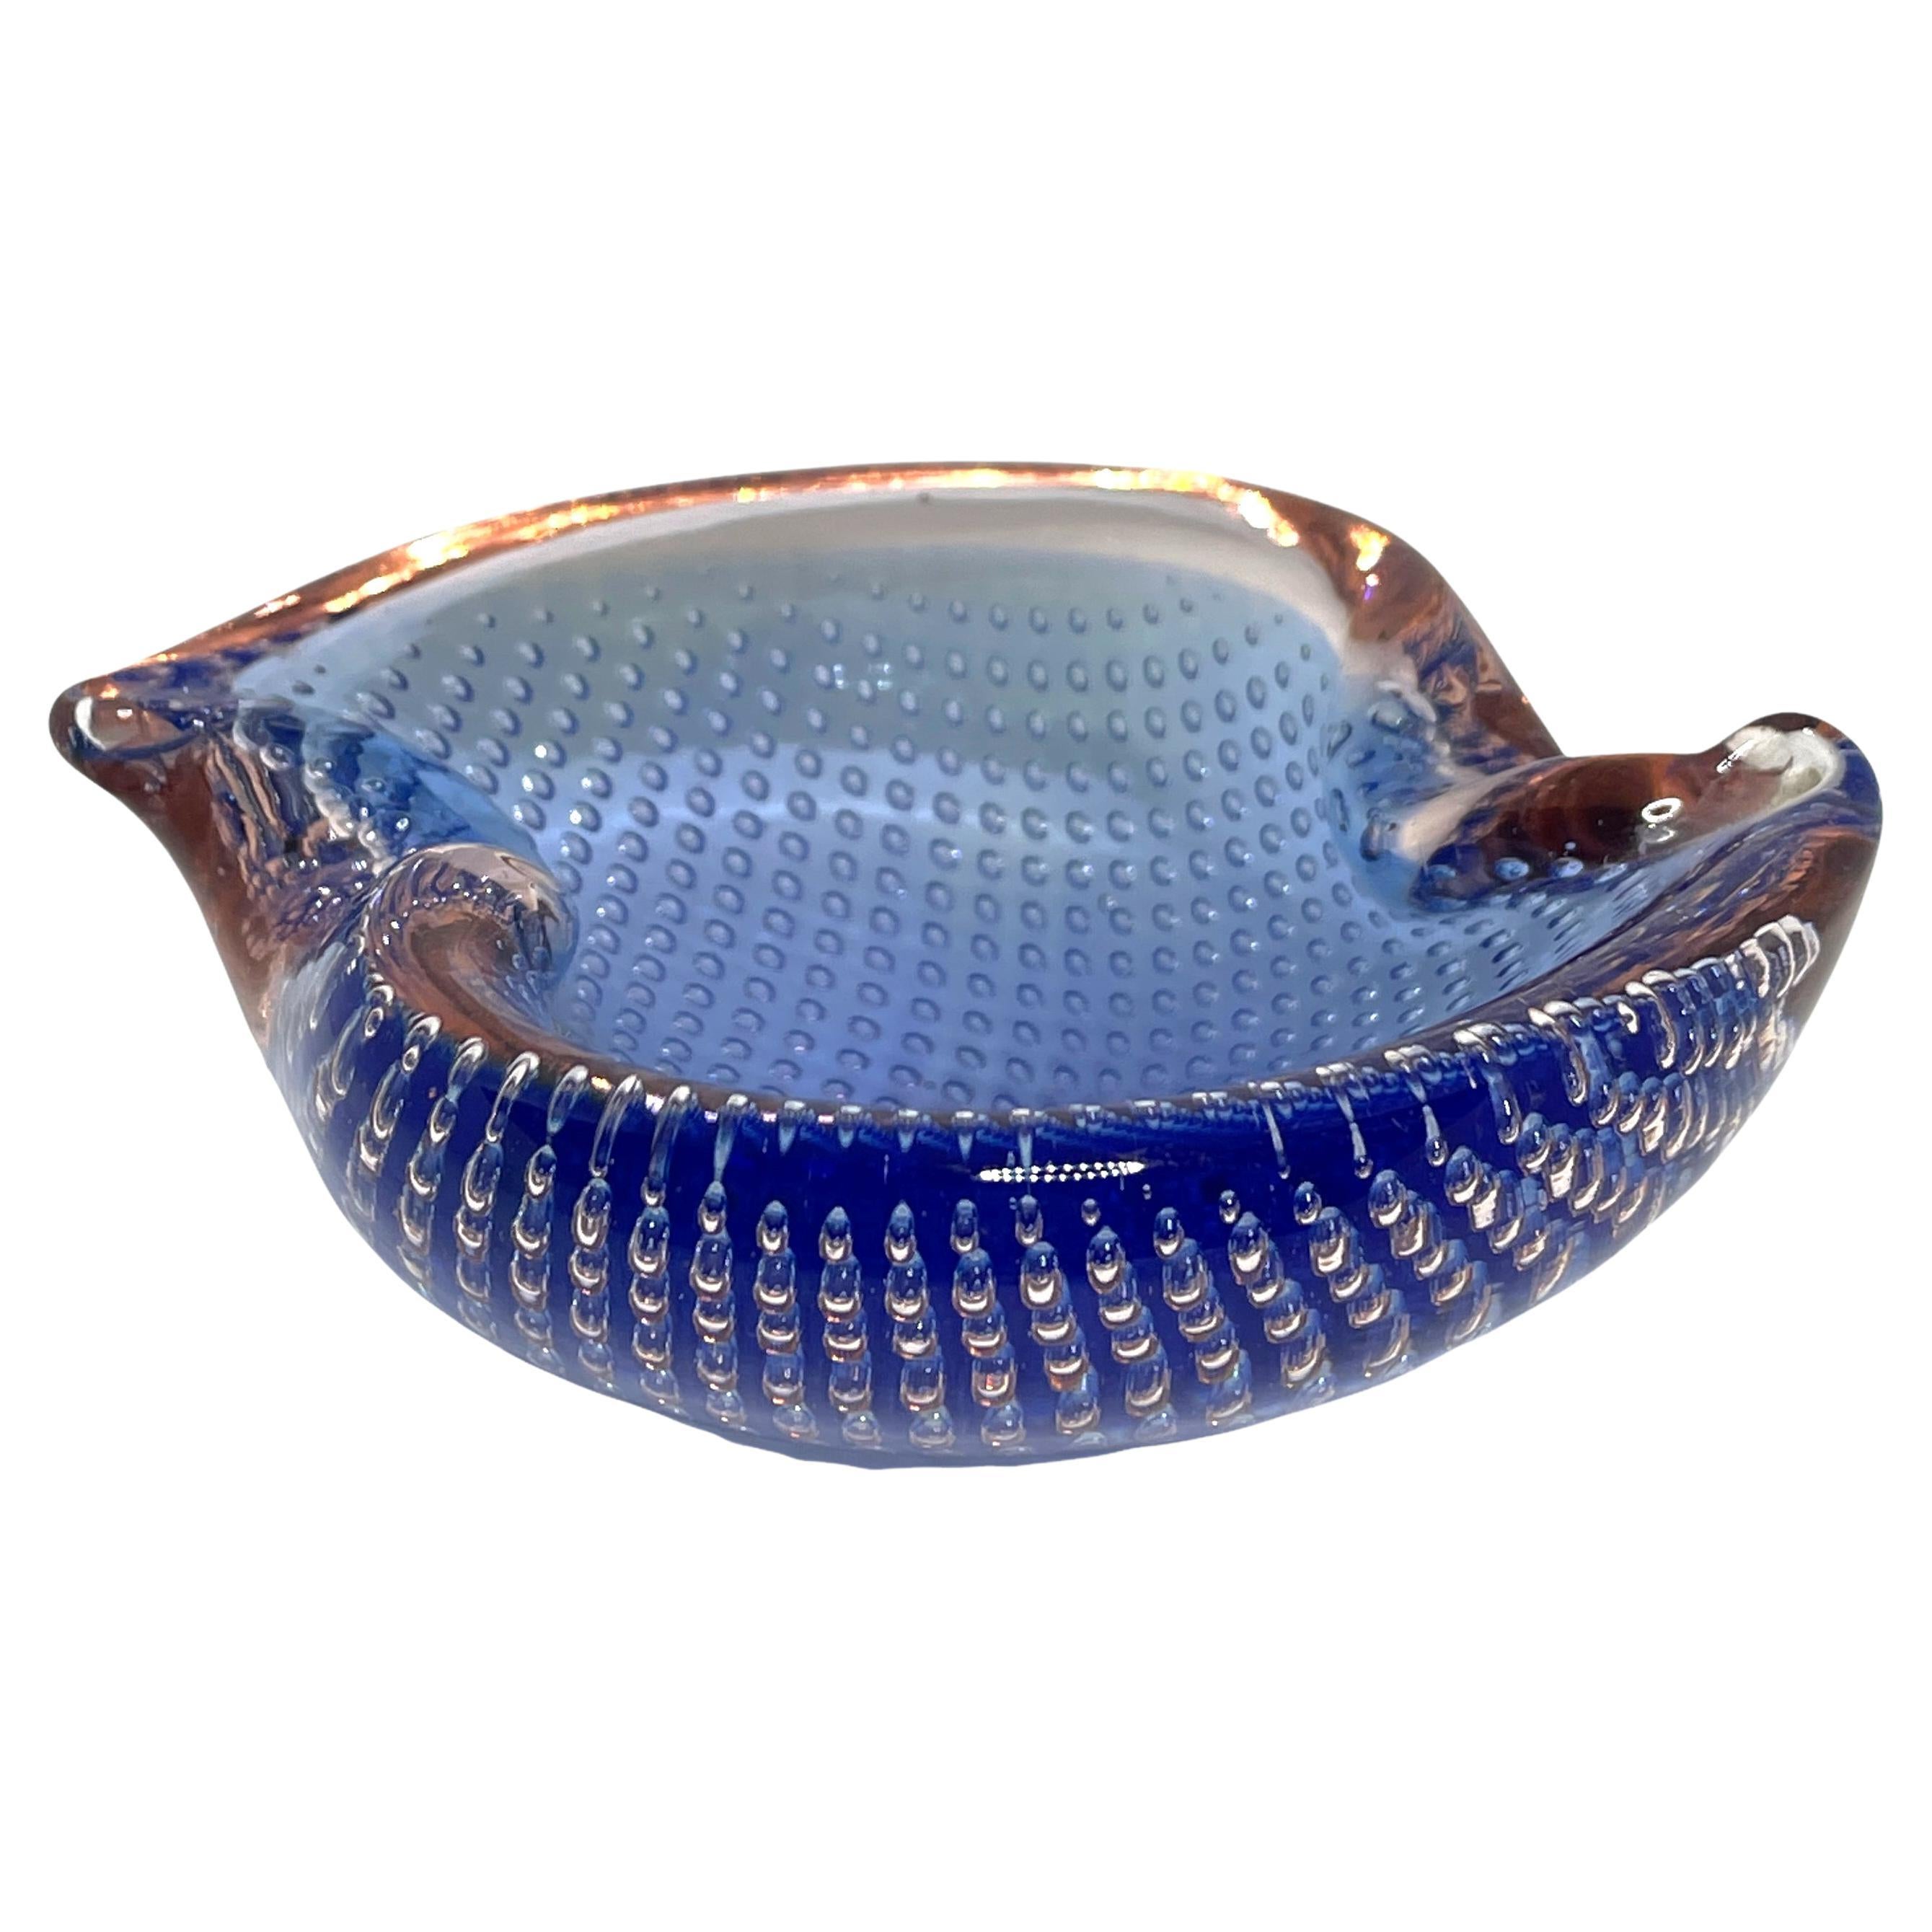 Petite Flavio Poli Murano Glass Ashtray Blue, Pink, Clear, Vintage, Italy, 1970s For Sale